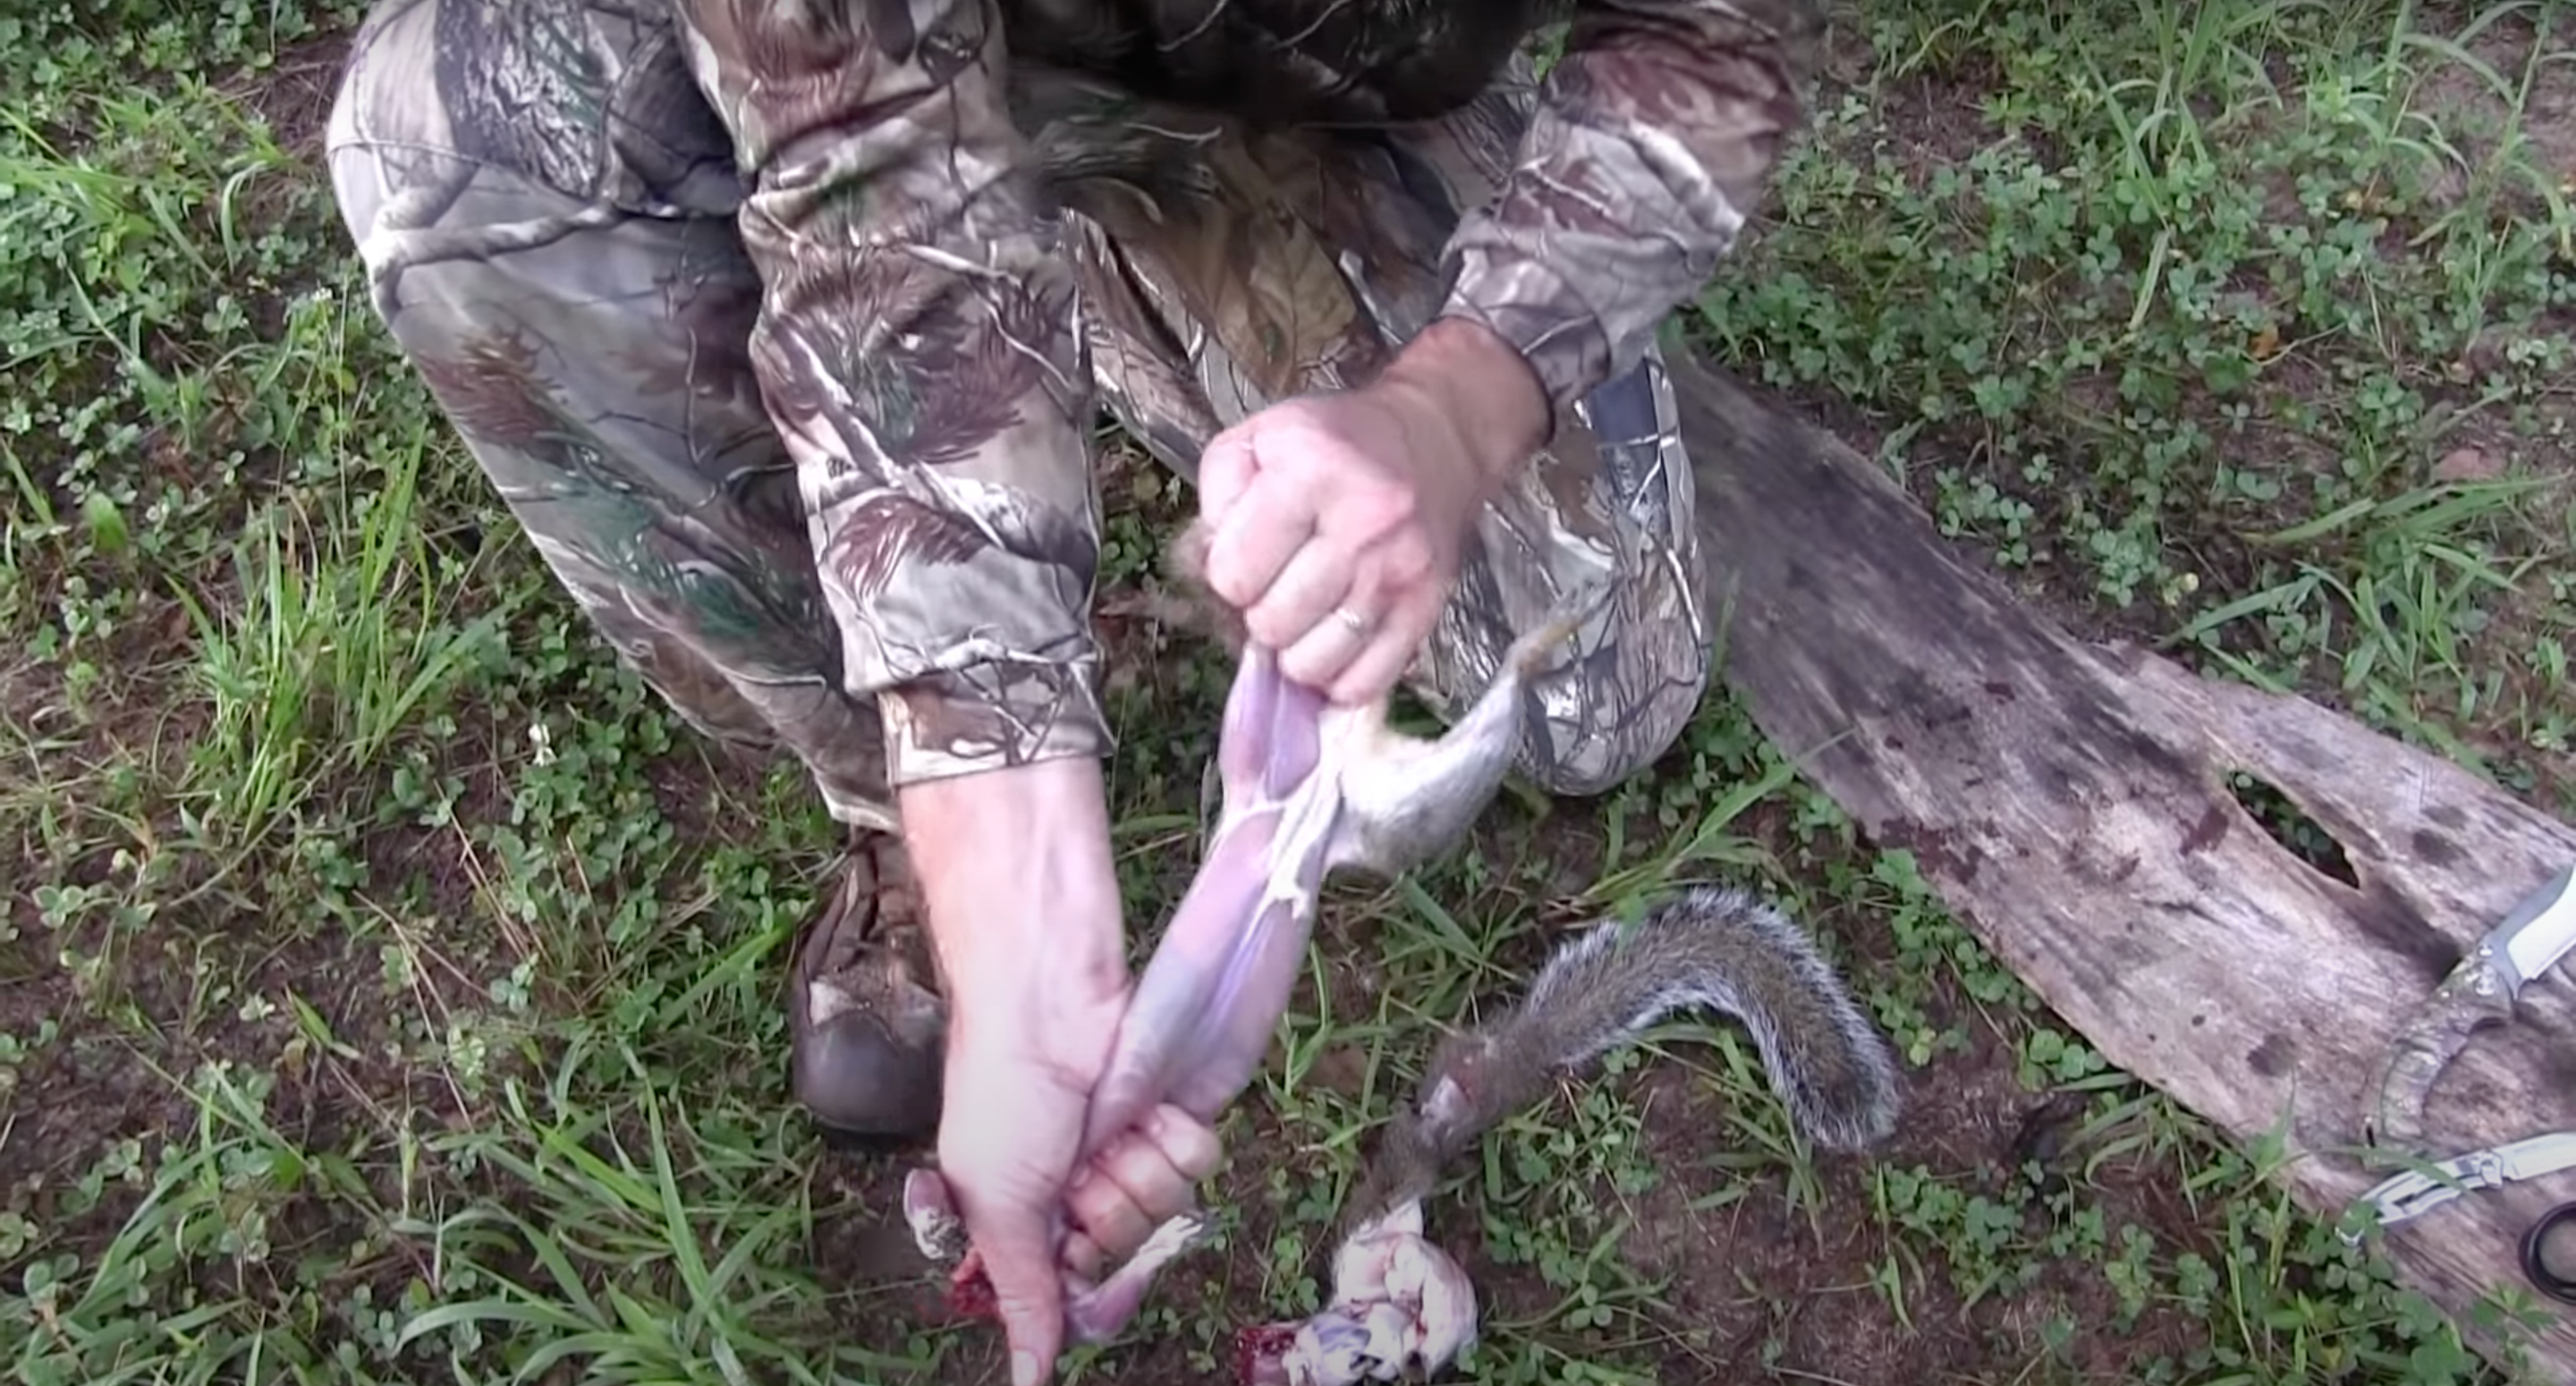 Hunter displaying how to skin a squirrel.